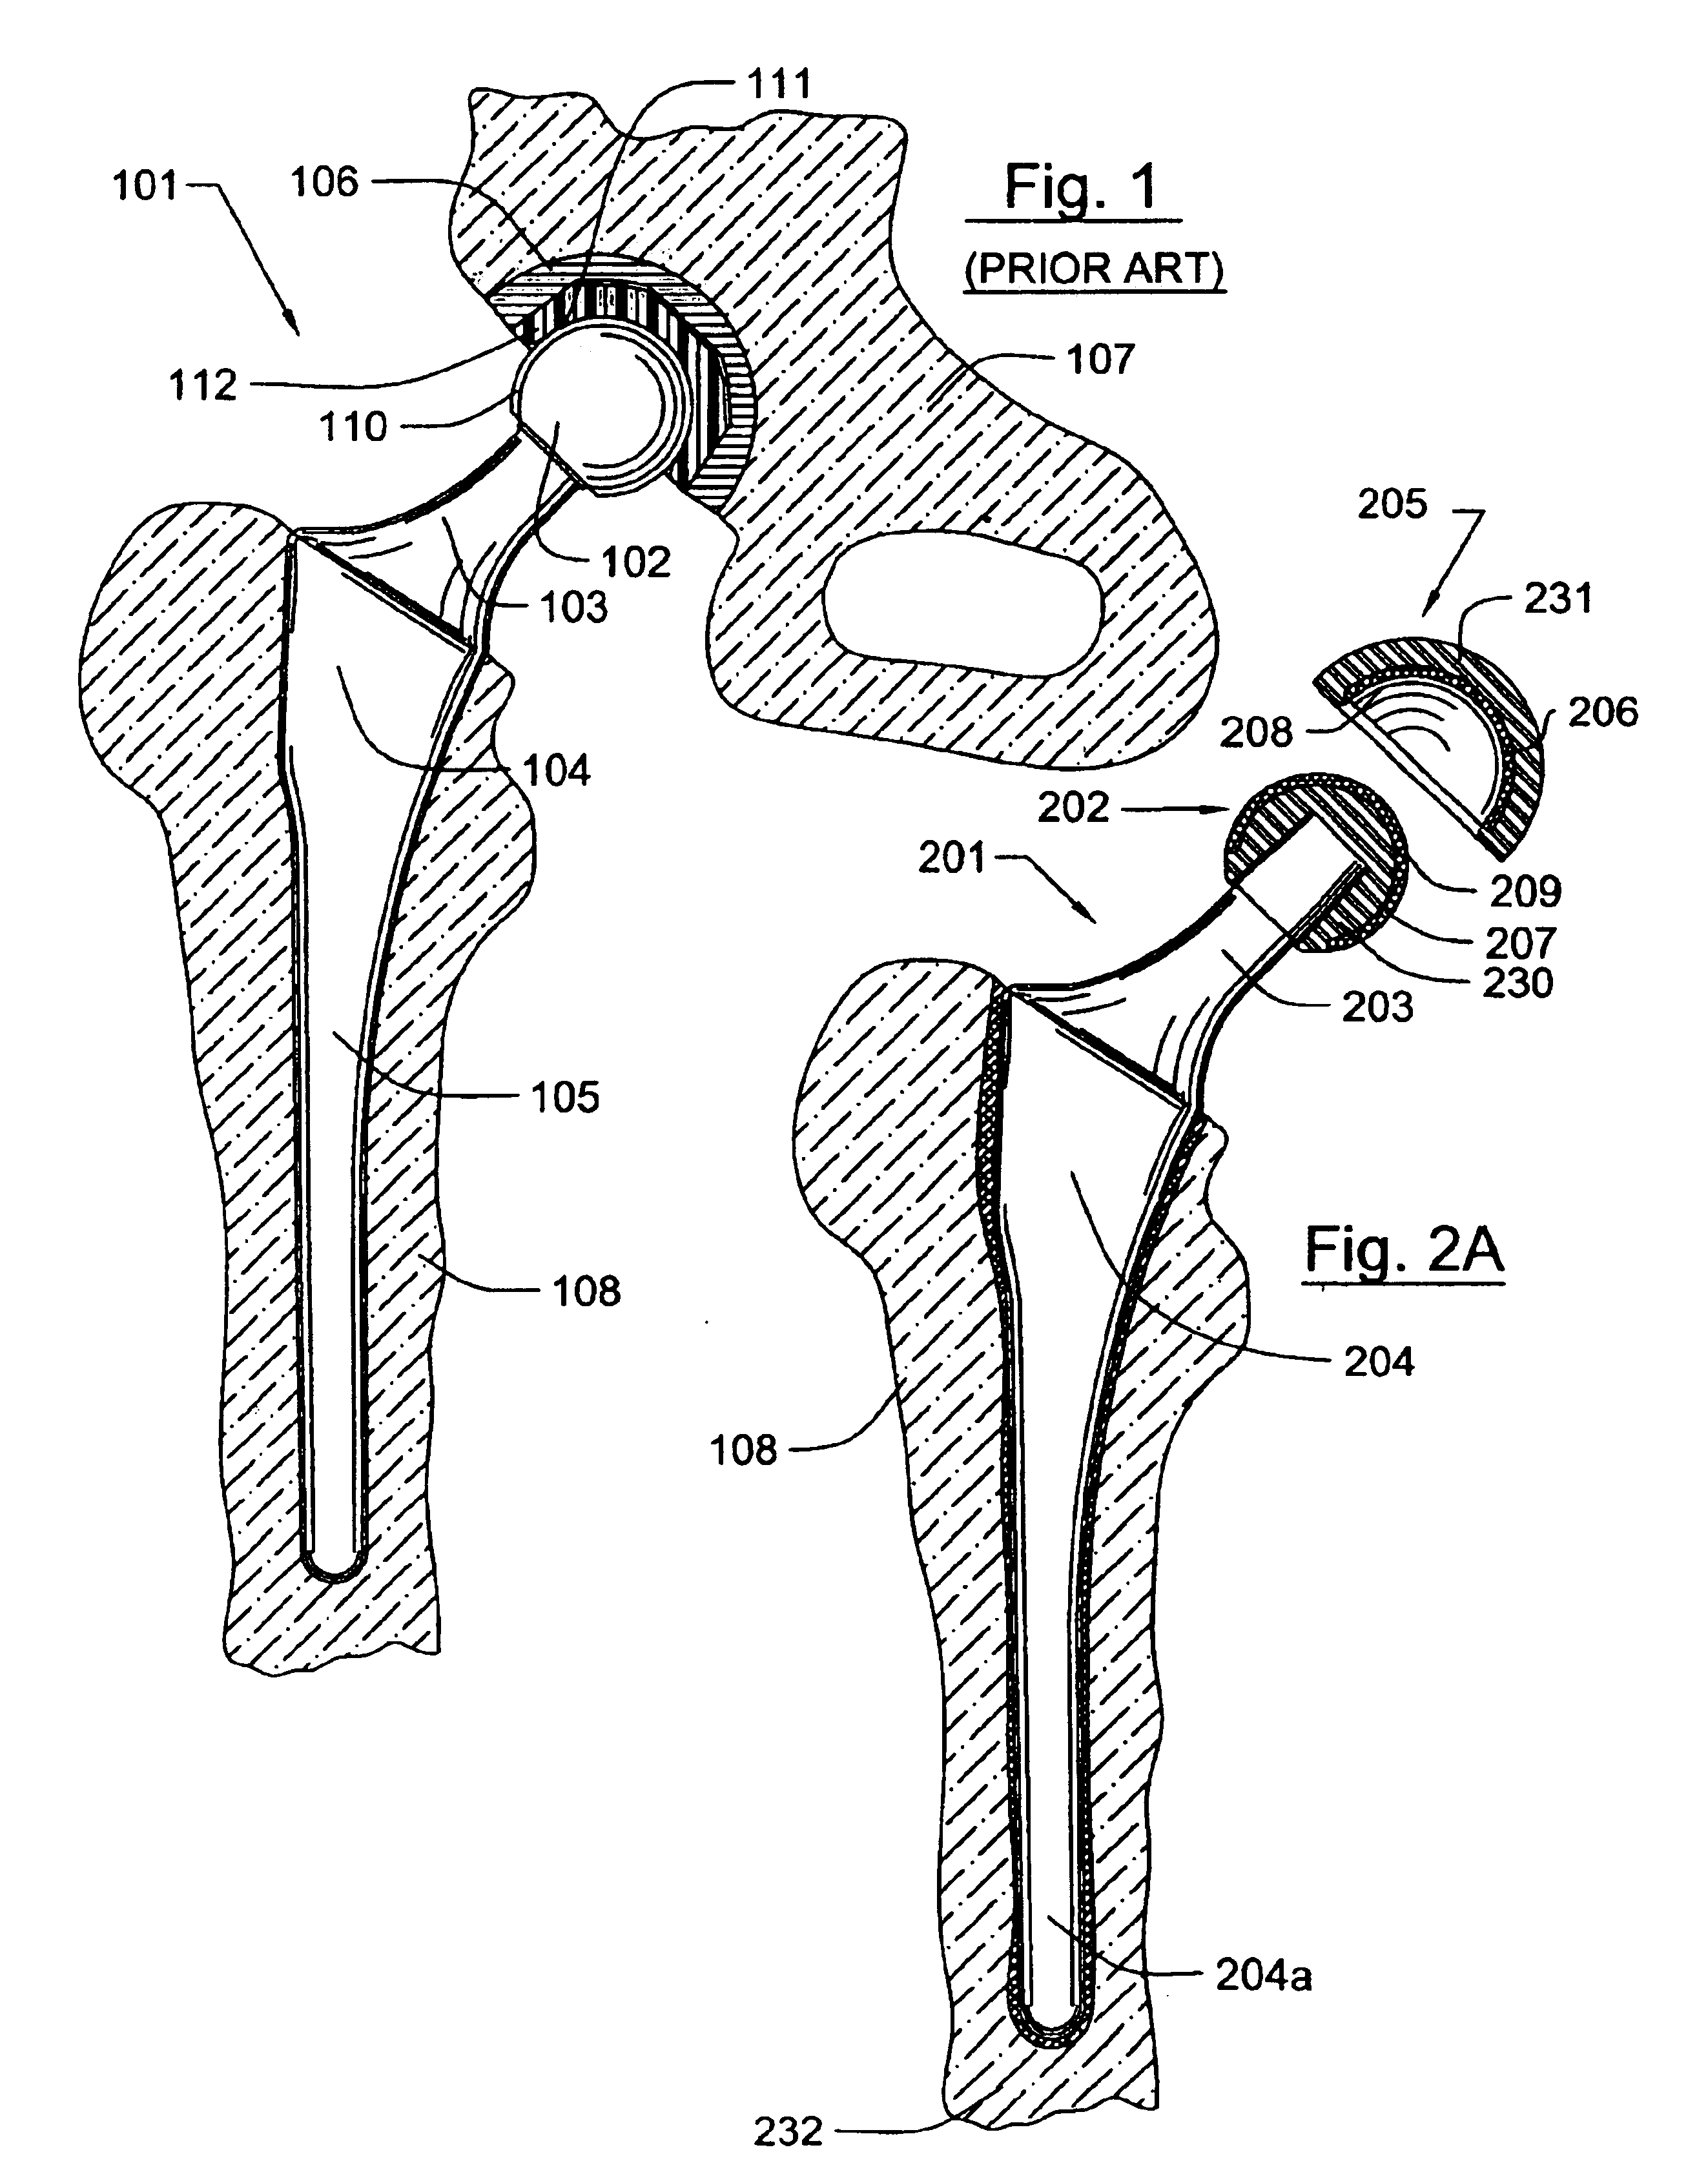 Prosthetic hip joint having a polycrystalline diamond articulation surface and a plurality of substrate layers